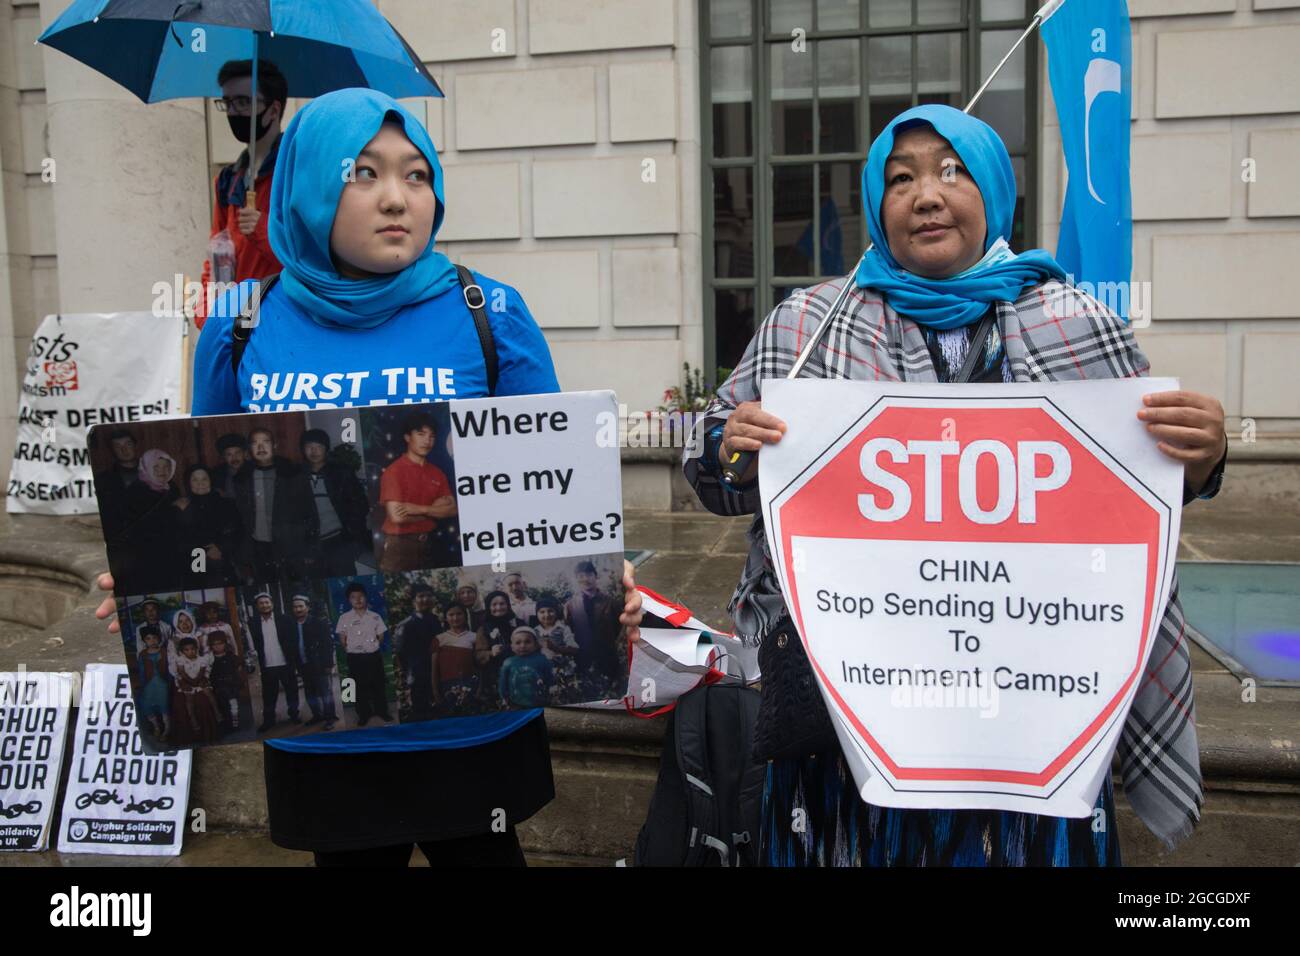 London, UK. 5th August, 2021. Members of the Uyghur community join activists from Uyghur Solidarity Campaign UK and other supporting groups protesting opposite the Chinese embassy in support of the Uyghur people’s struggle for freedom. Activists highlighted the Chinese government's persecution and forced assimilation of Uyghurs, Kazakhs and other indigenous people in East Turkestan and Xinjiang and called for them to have the right to determine their own futures through a democratic process. Credit: Mark Kerrison/Alamy Live News Stock Photo